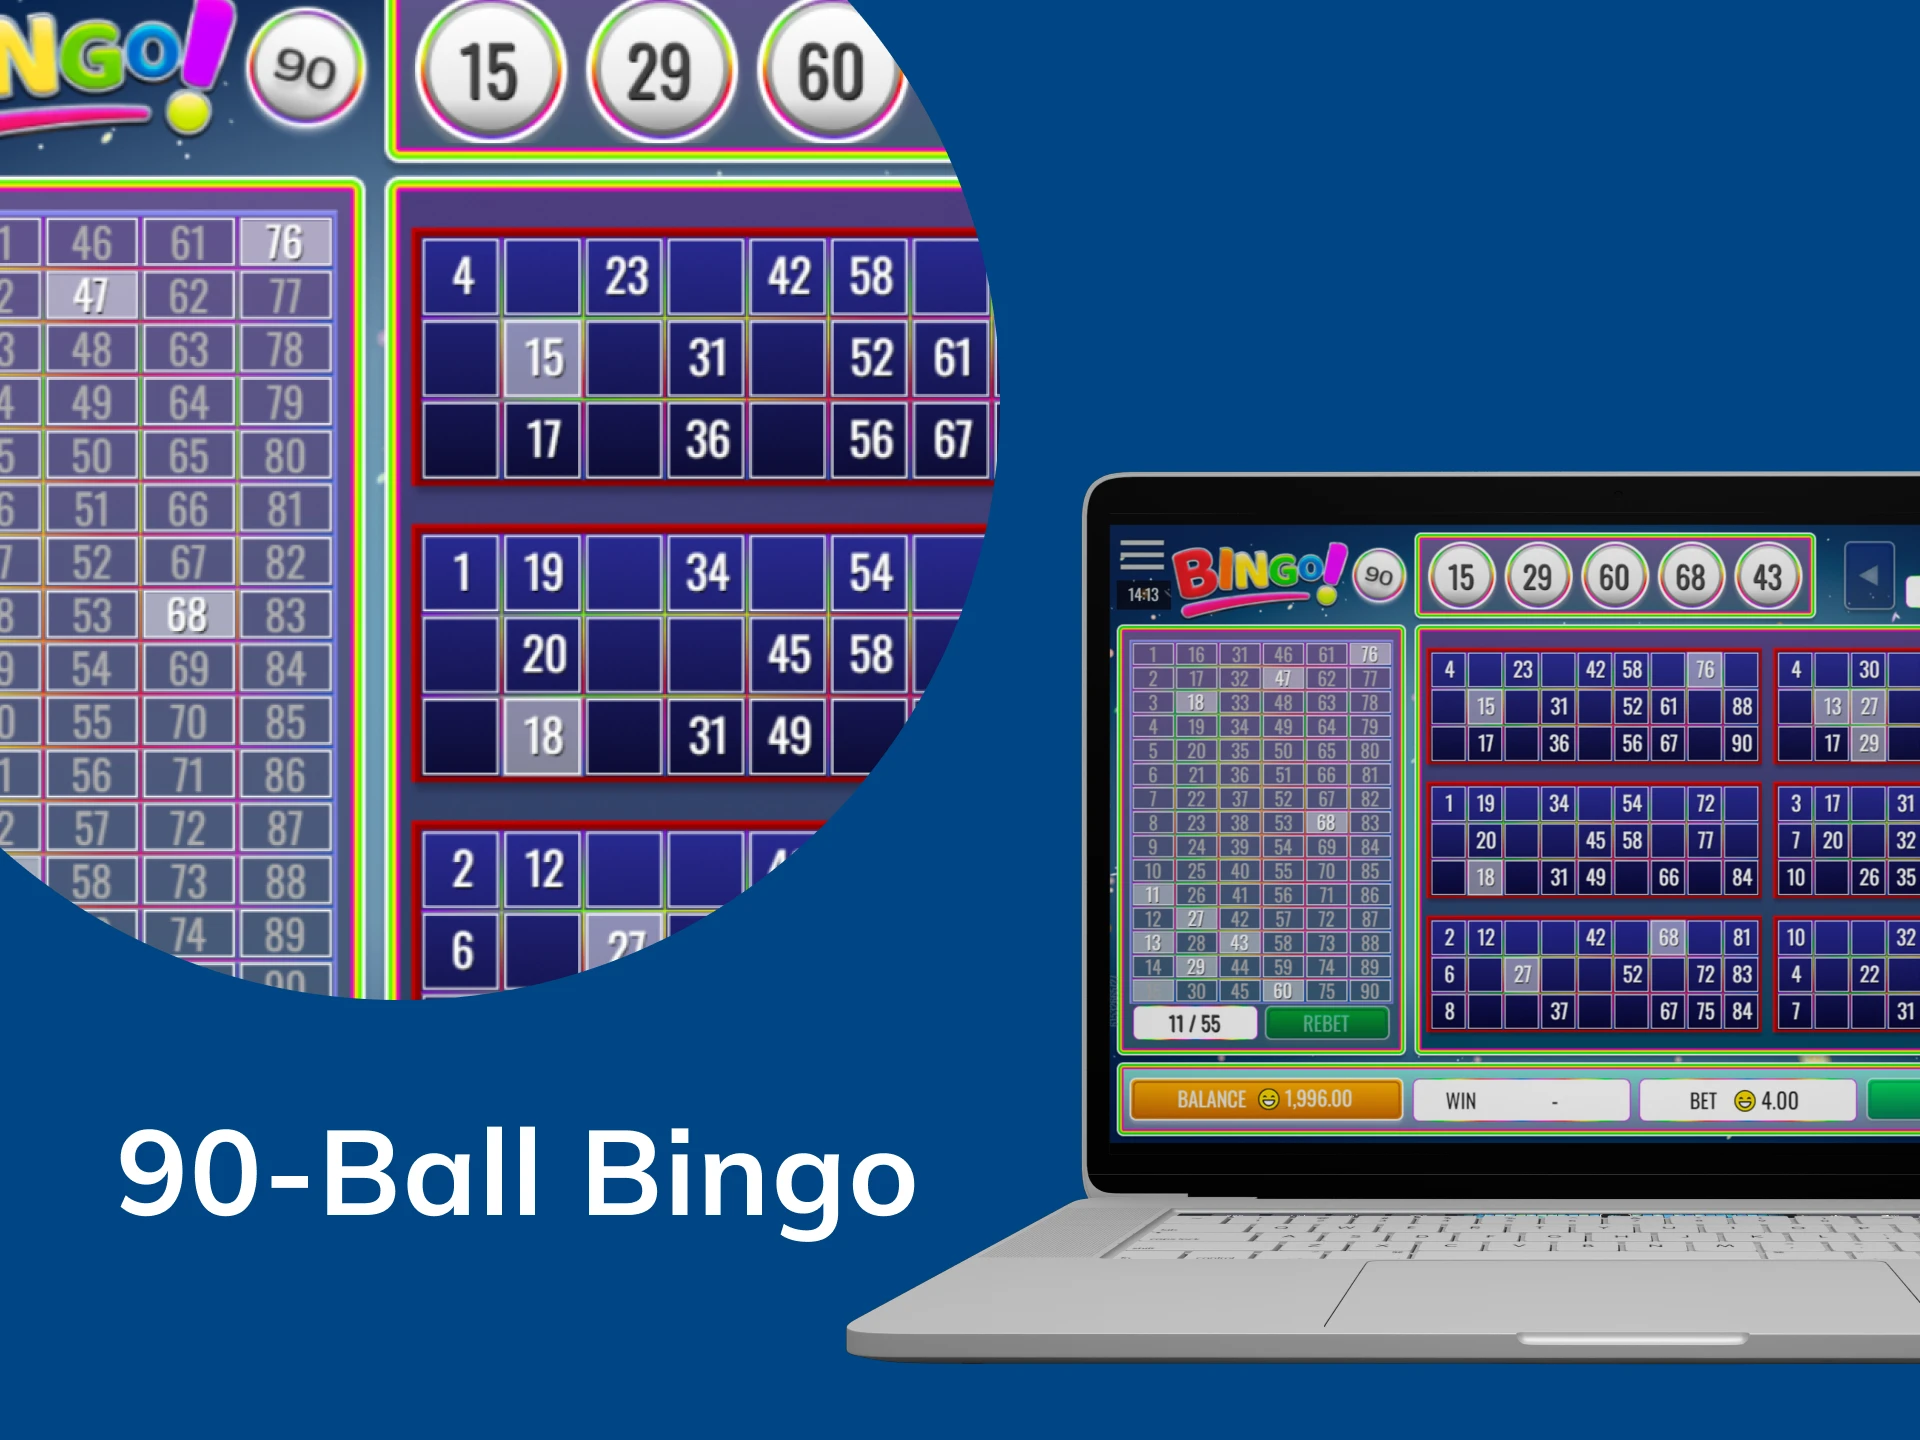 Try your hand at the 90-ball bingo.